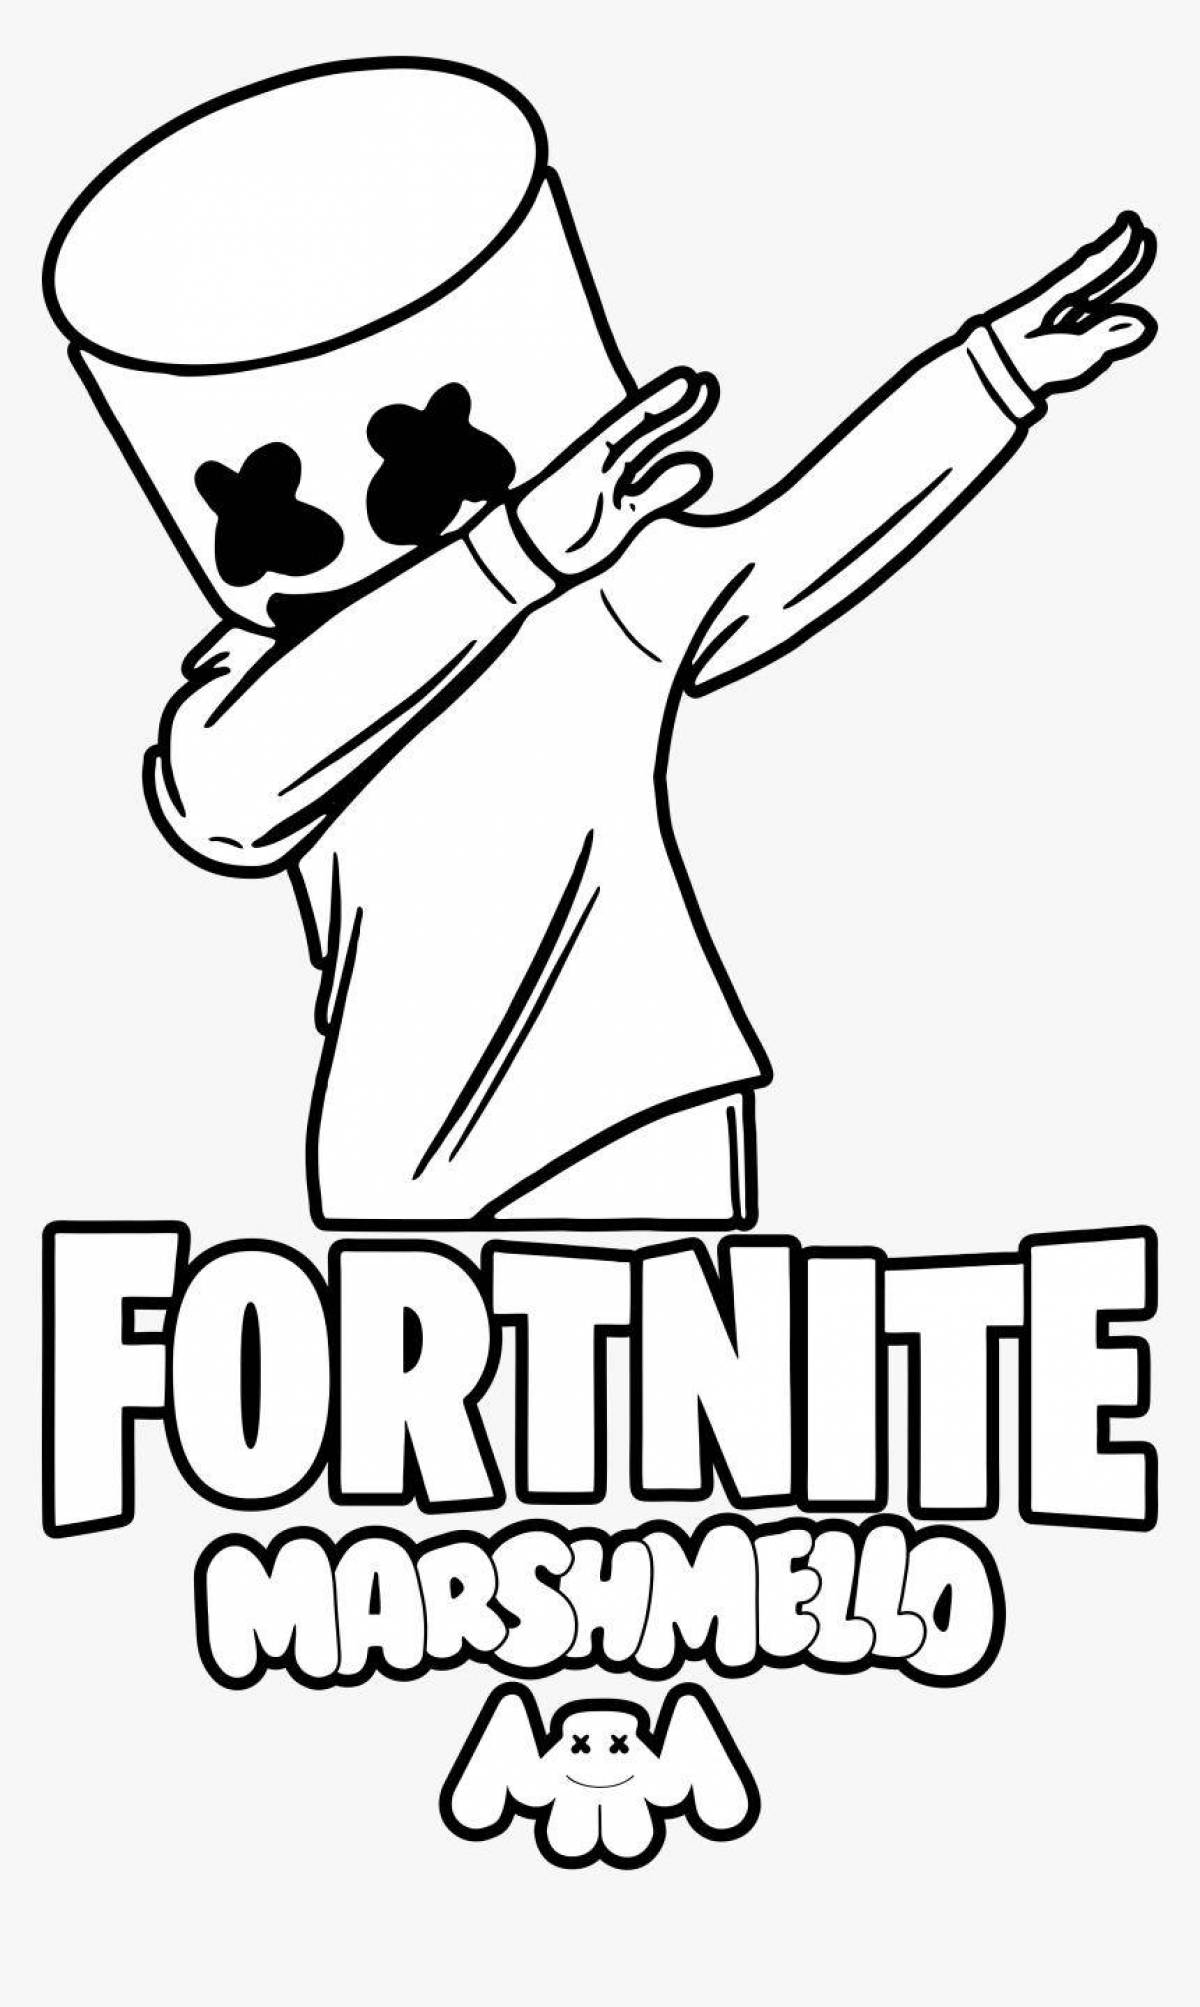 Fun coloring marshmallow from fortnite